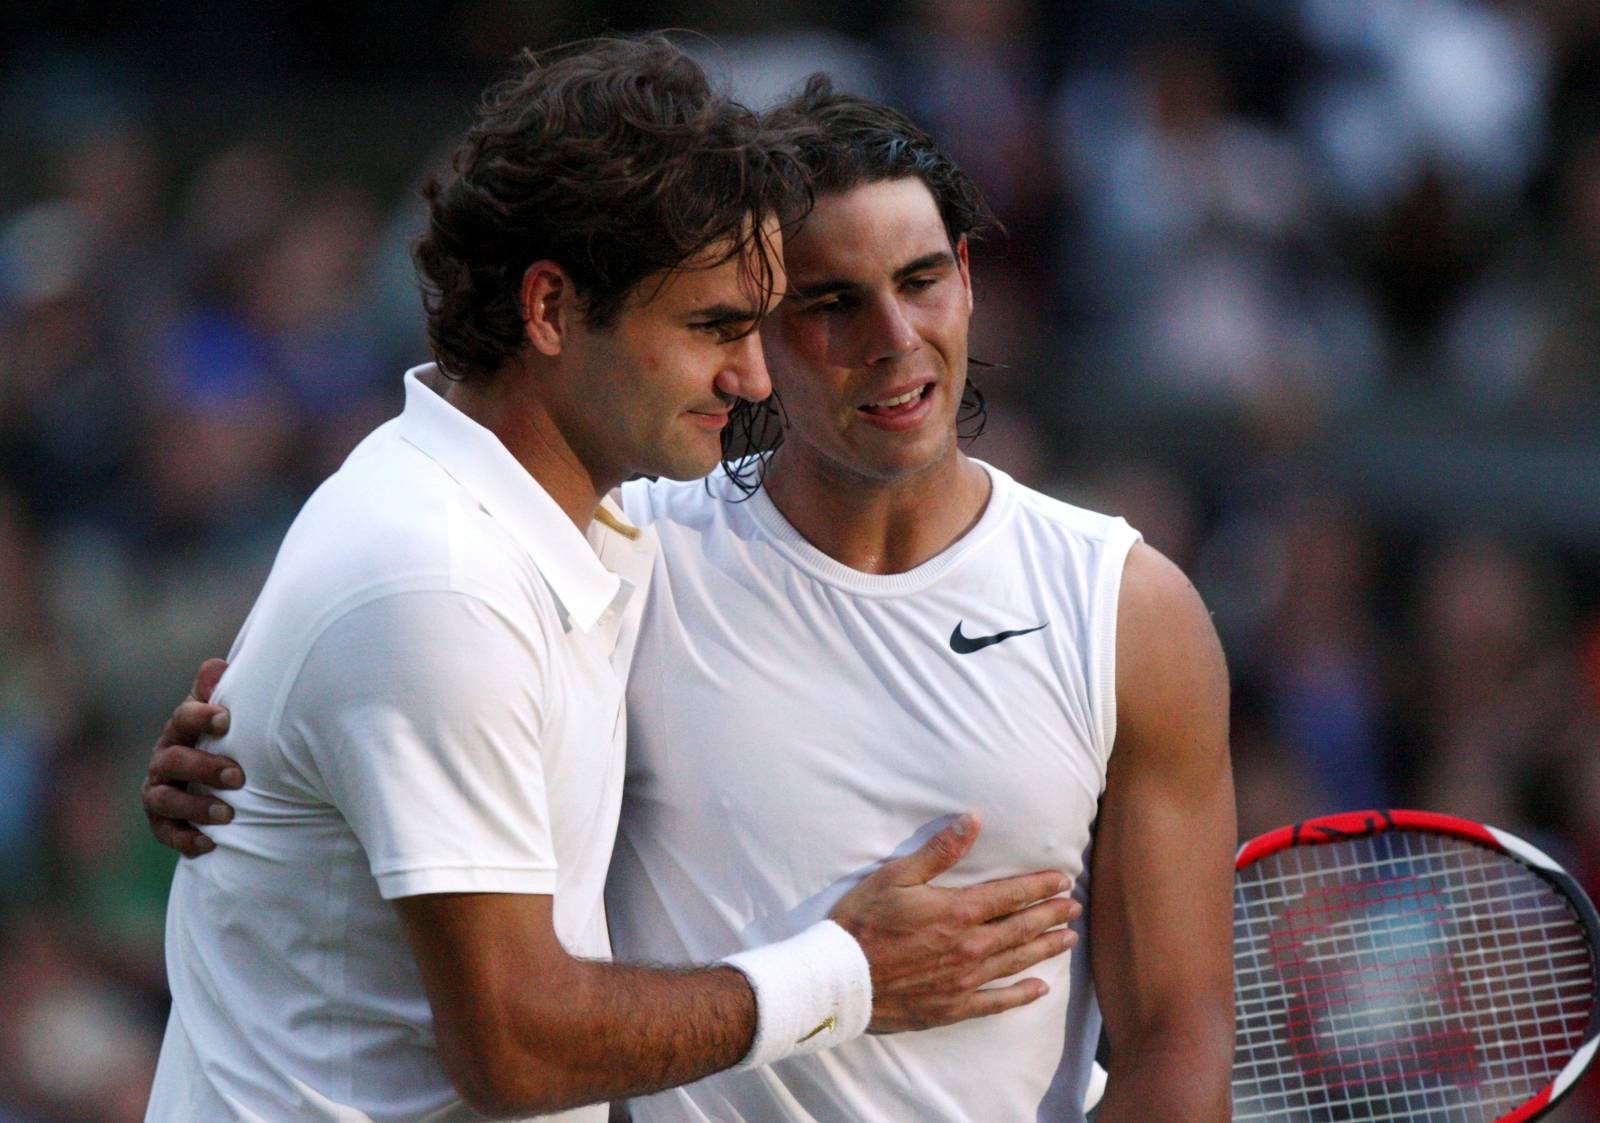 FILE PHOTO: Rafael Nadal is embraced by Roger Federer after defeating him in their finals match at the Wimbledon tennis championships in London